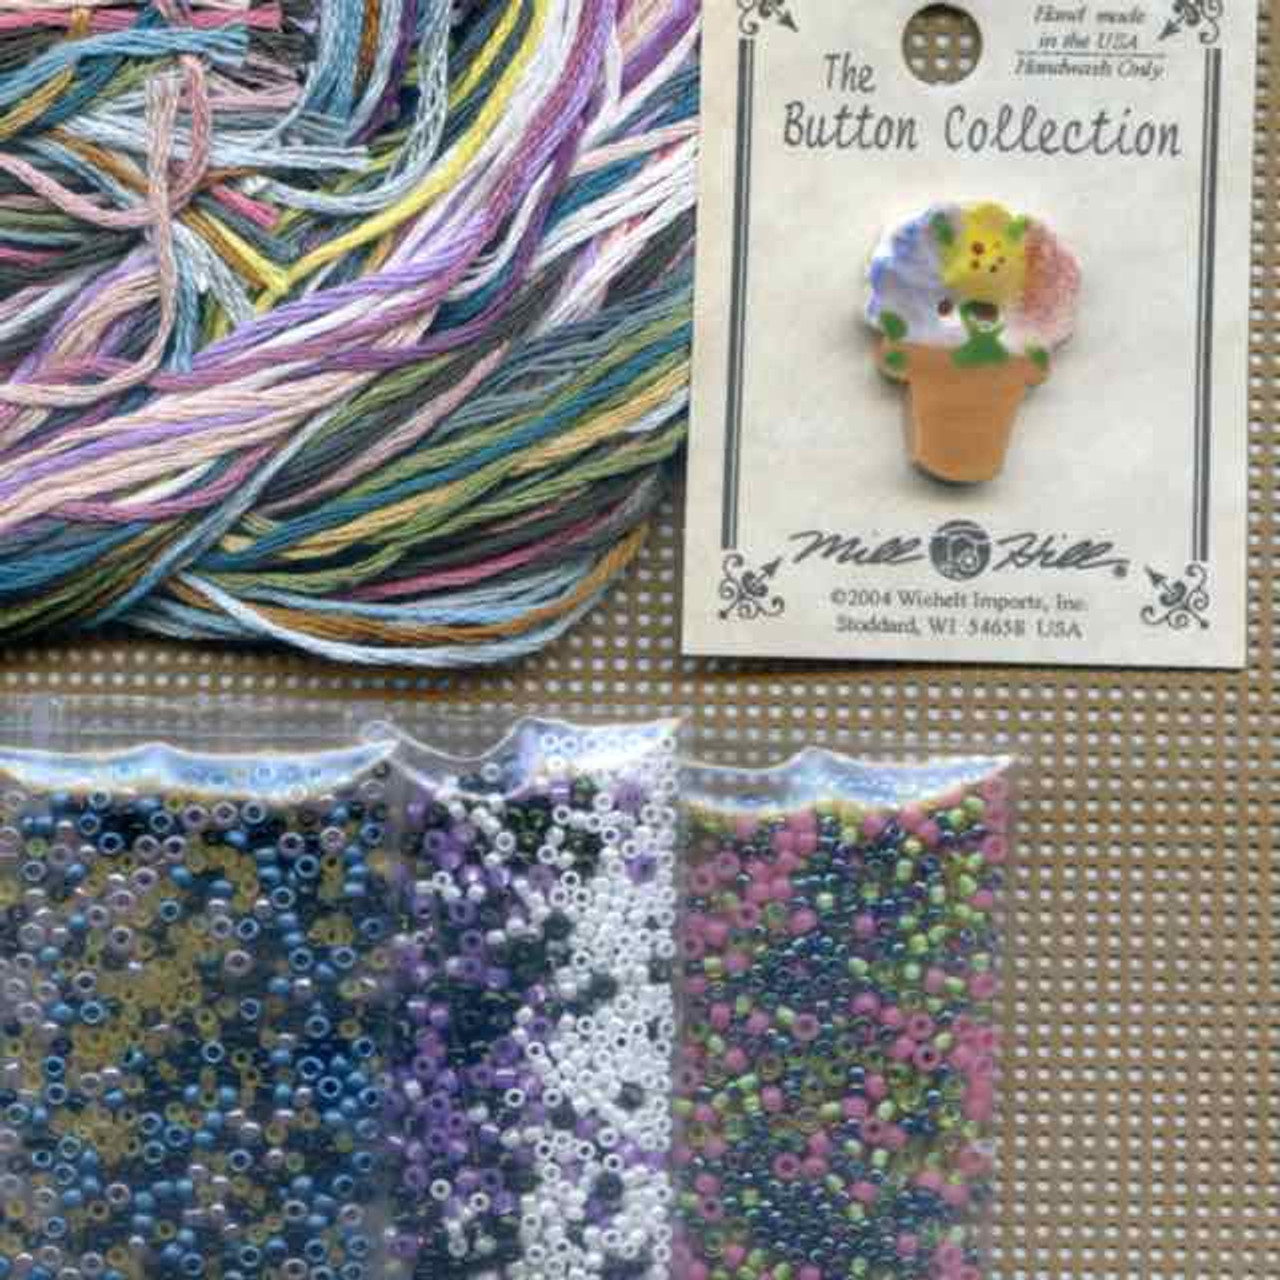  Sweet Shoppe Beaded Counted Cross Stitch Kit Mill Hill 2018  Buttons Beads Spring Main Street Collection MH141812